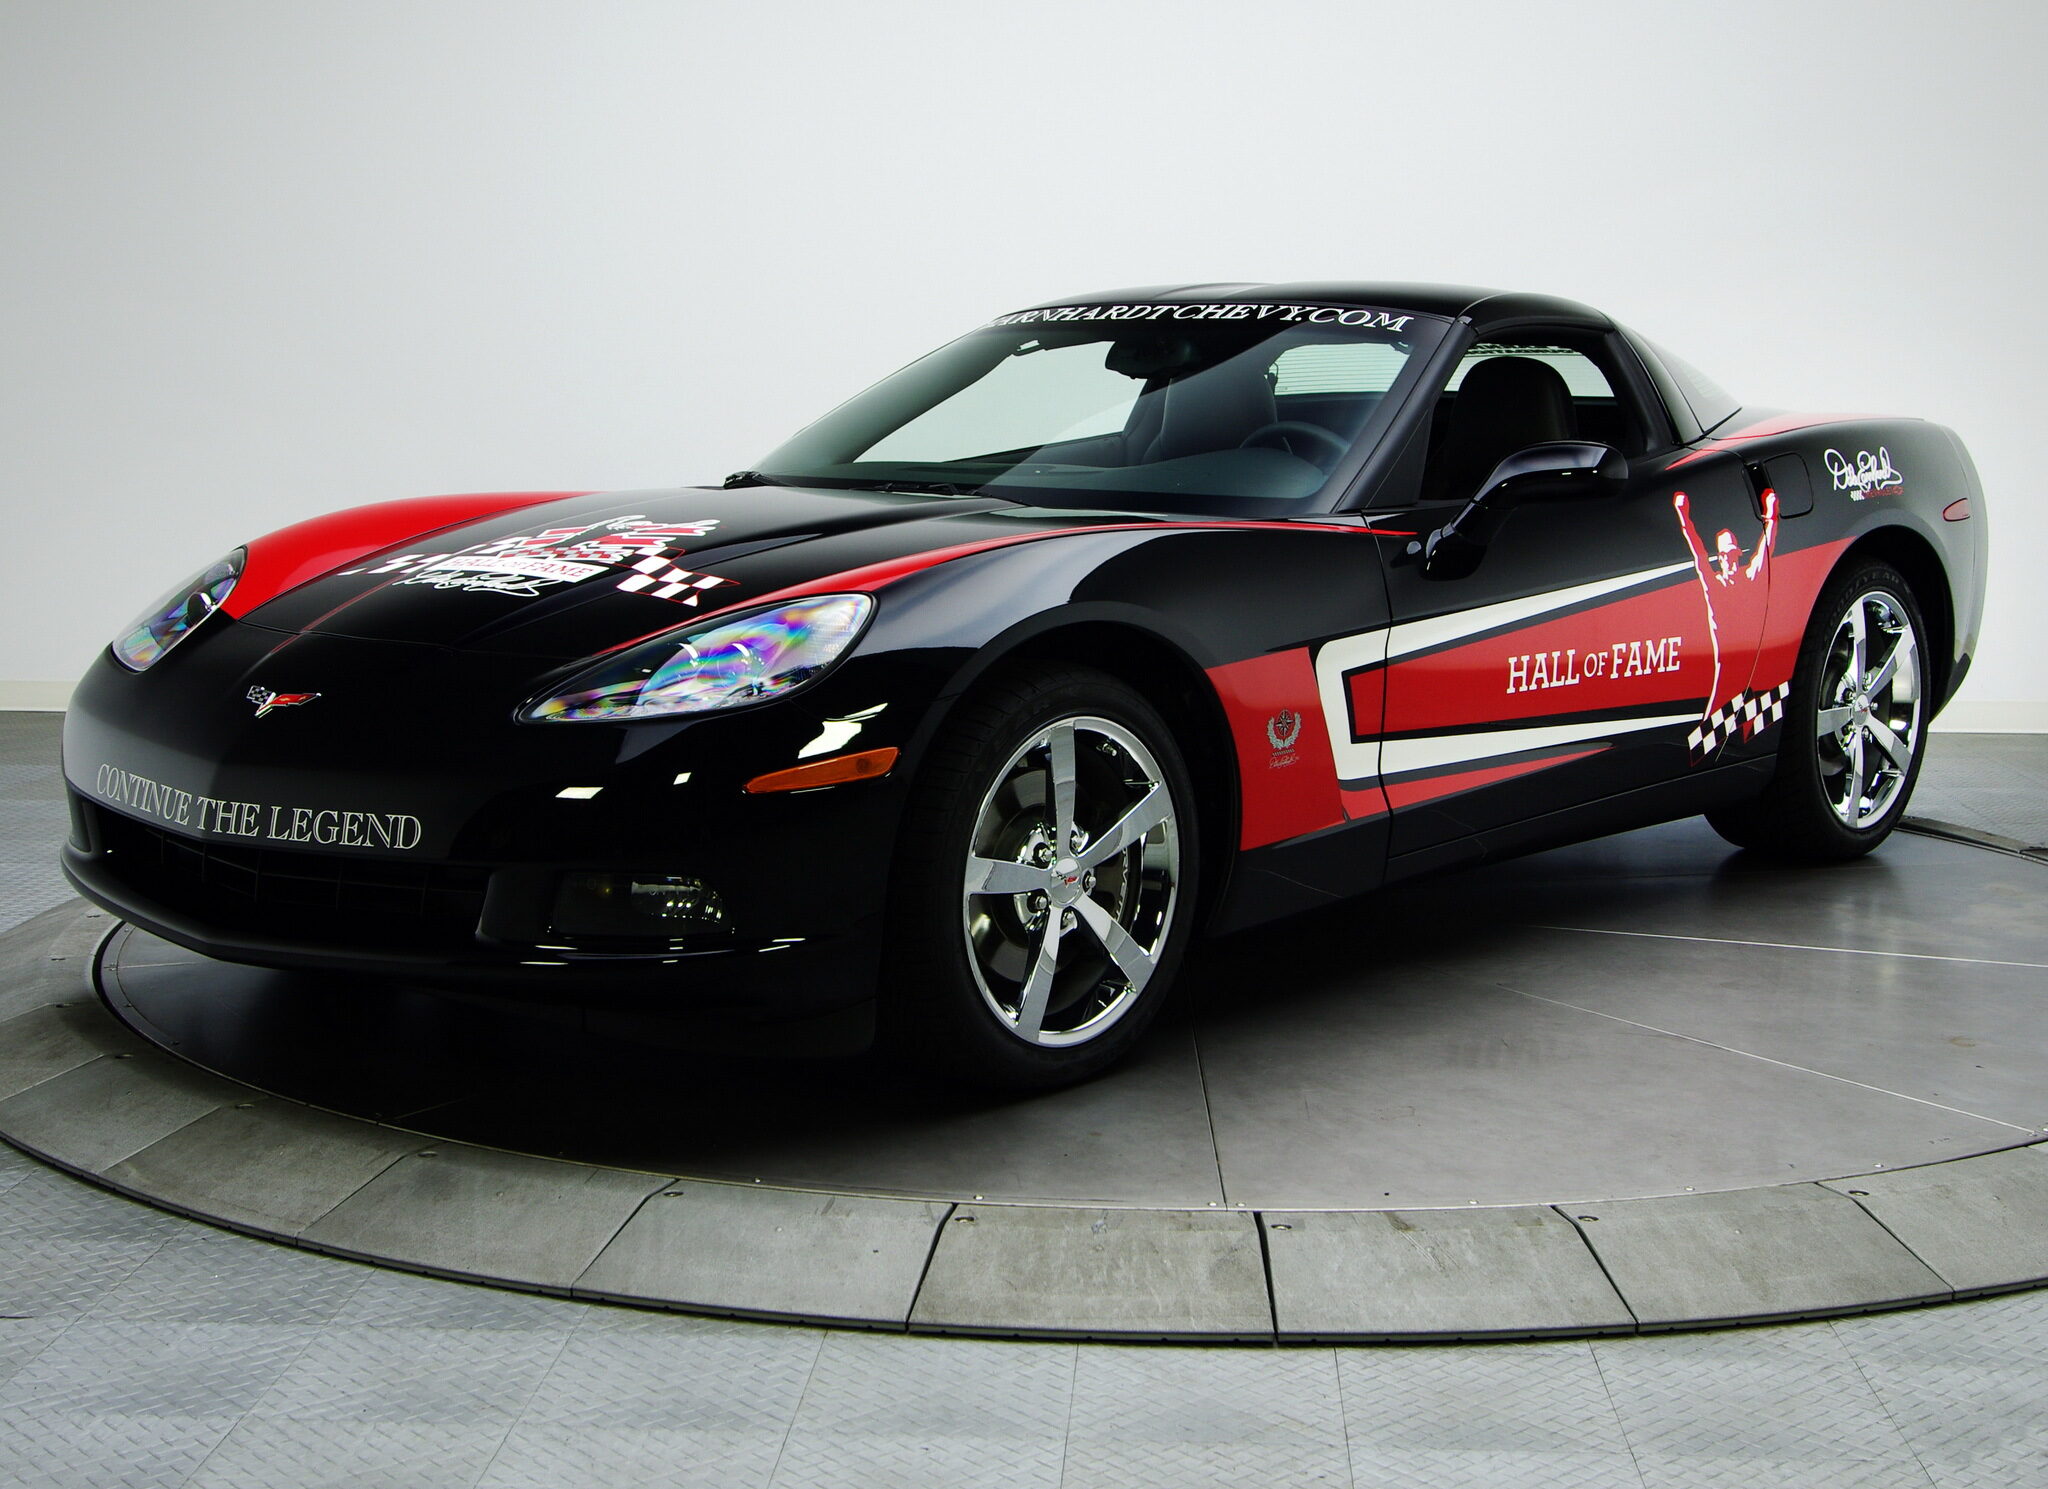 Corvette Of The Day: 2010 Corvette Coupe Earnhardt Hall of Fame Edition